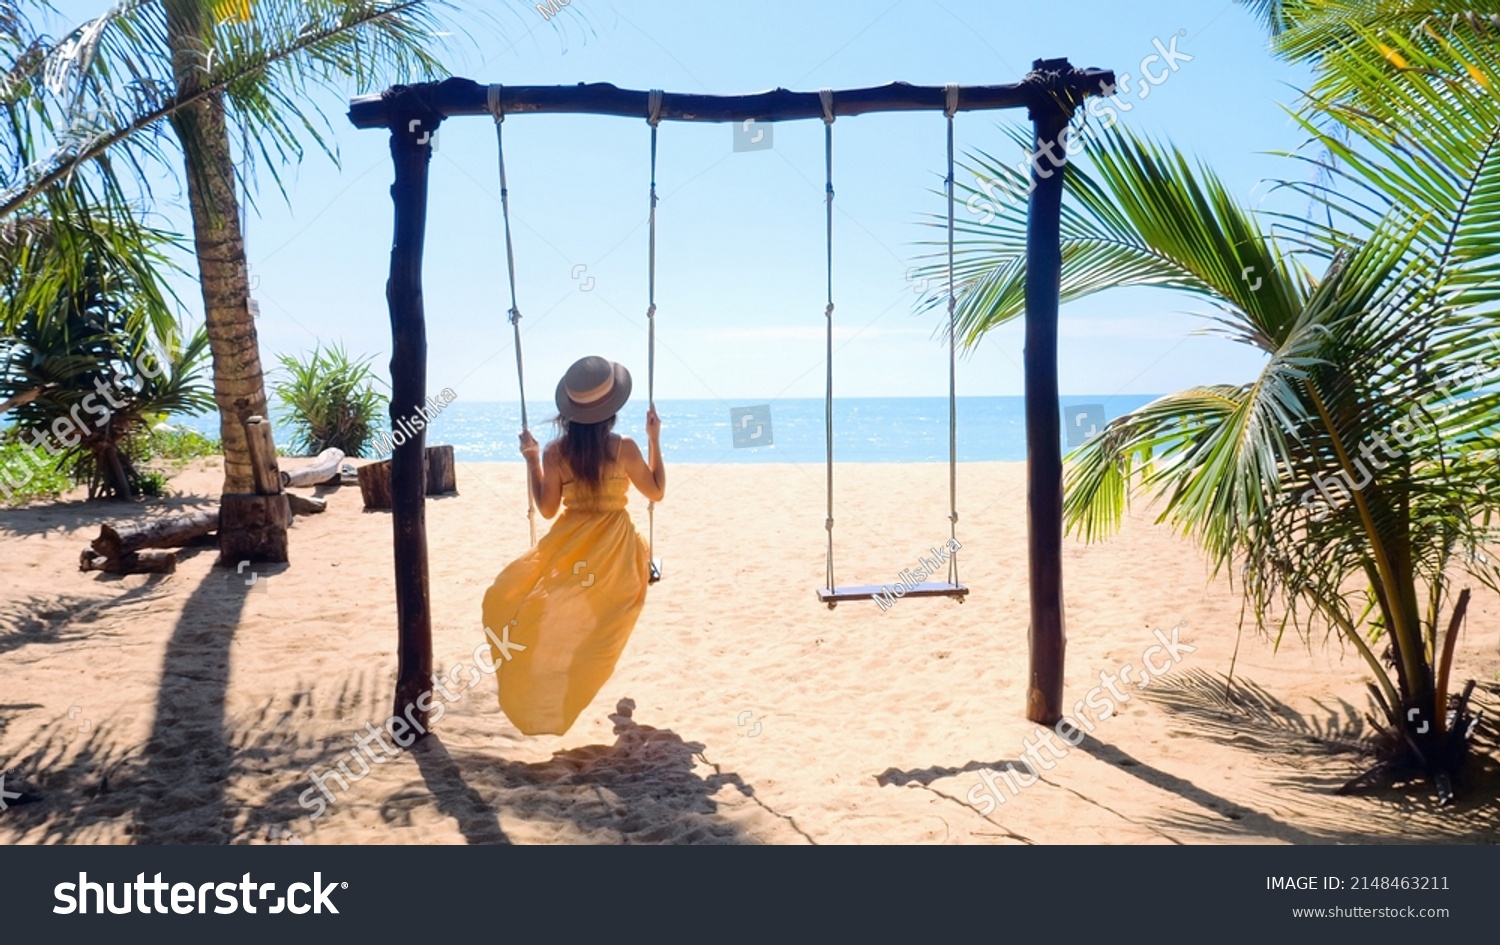 Woman tourist swinging on swing, sandy beach with palm trees and blue sea on background. Tropical vacation. Girl in yellow dress on summer holidays, fun on sunny coastal, good mood, romantic. #2148463211